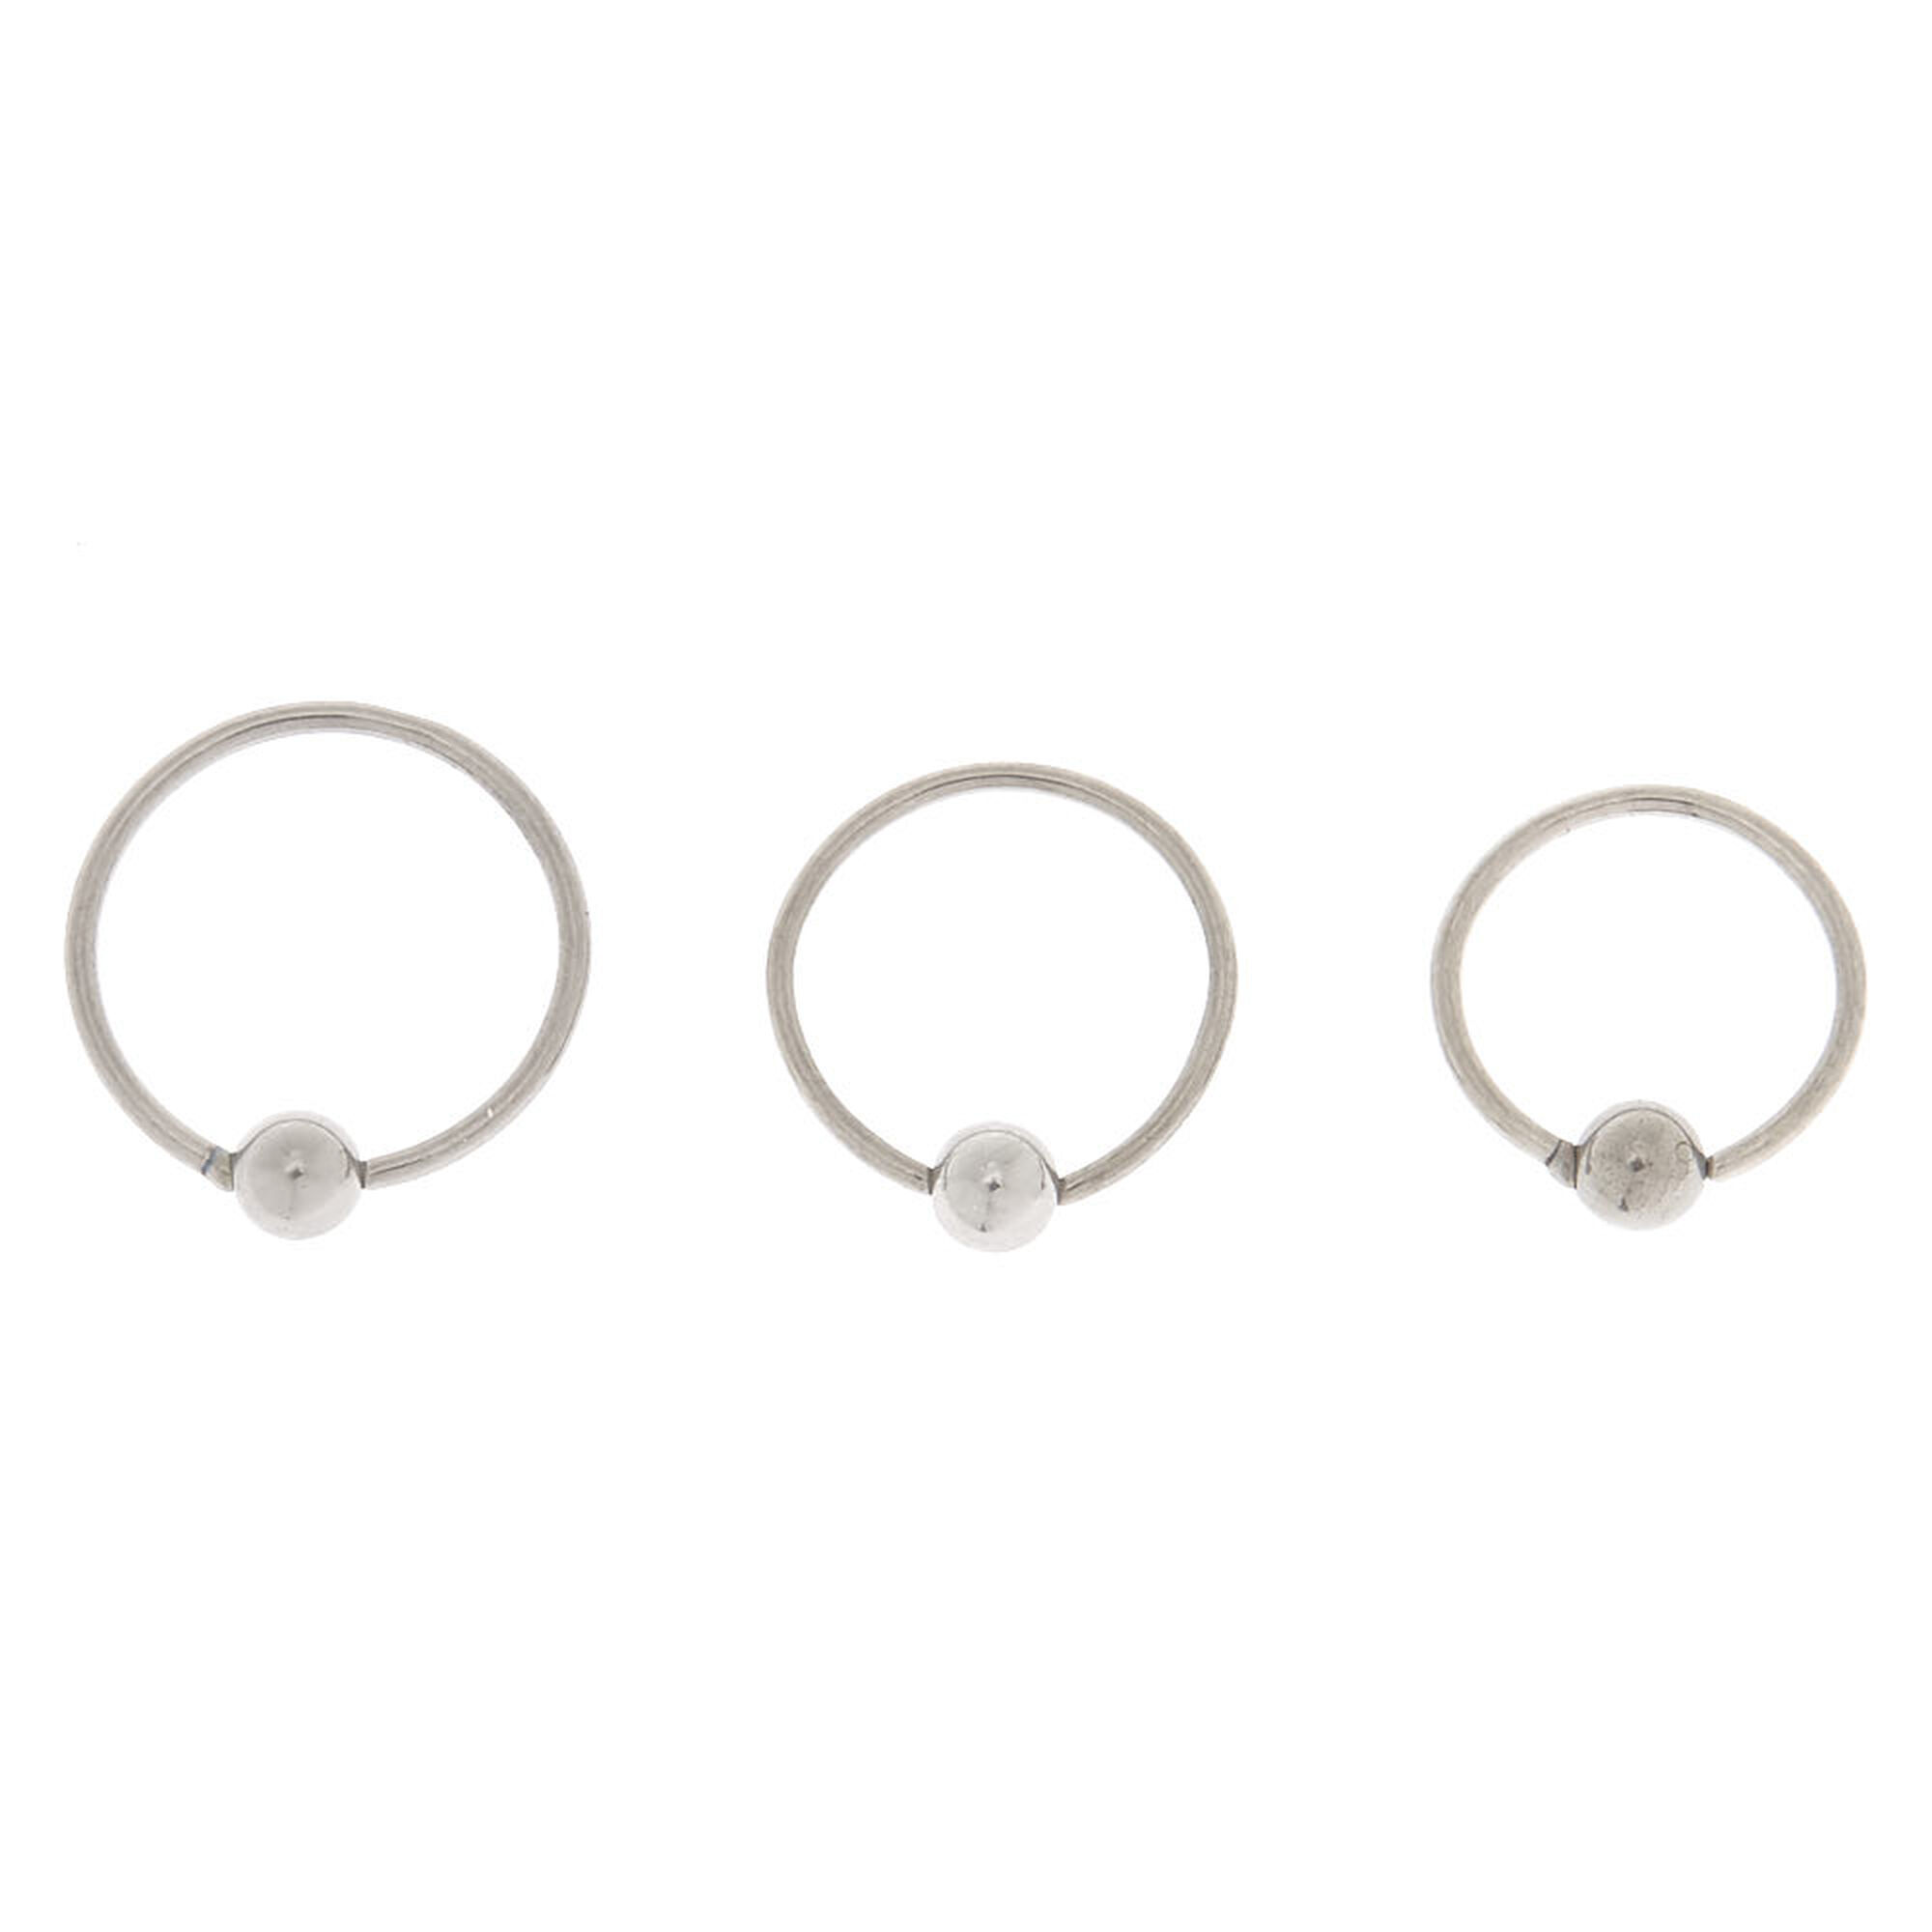 Titanium 20G Beaded Nose Rings 3 Pack Claire's US